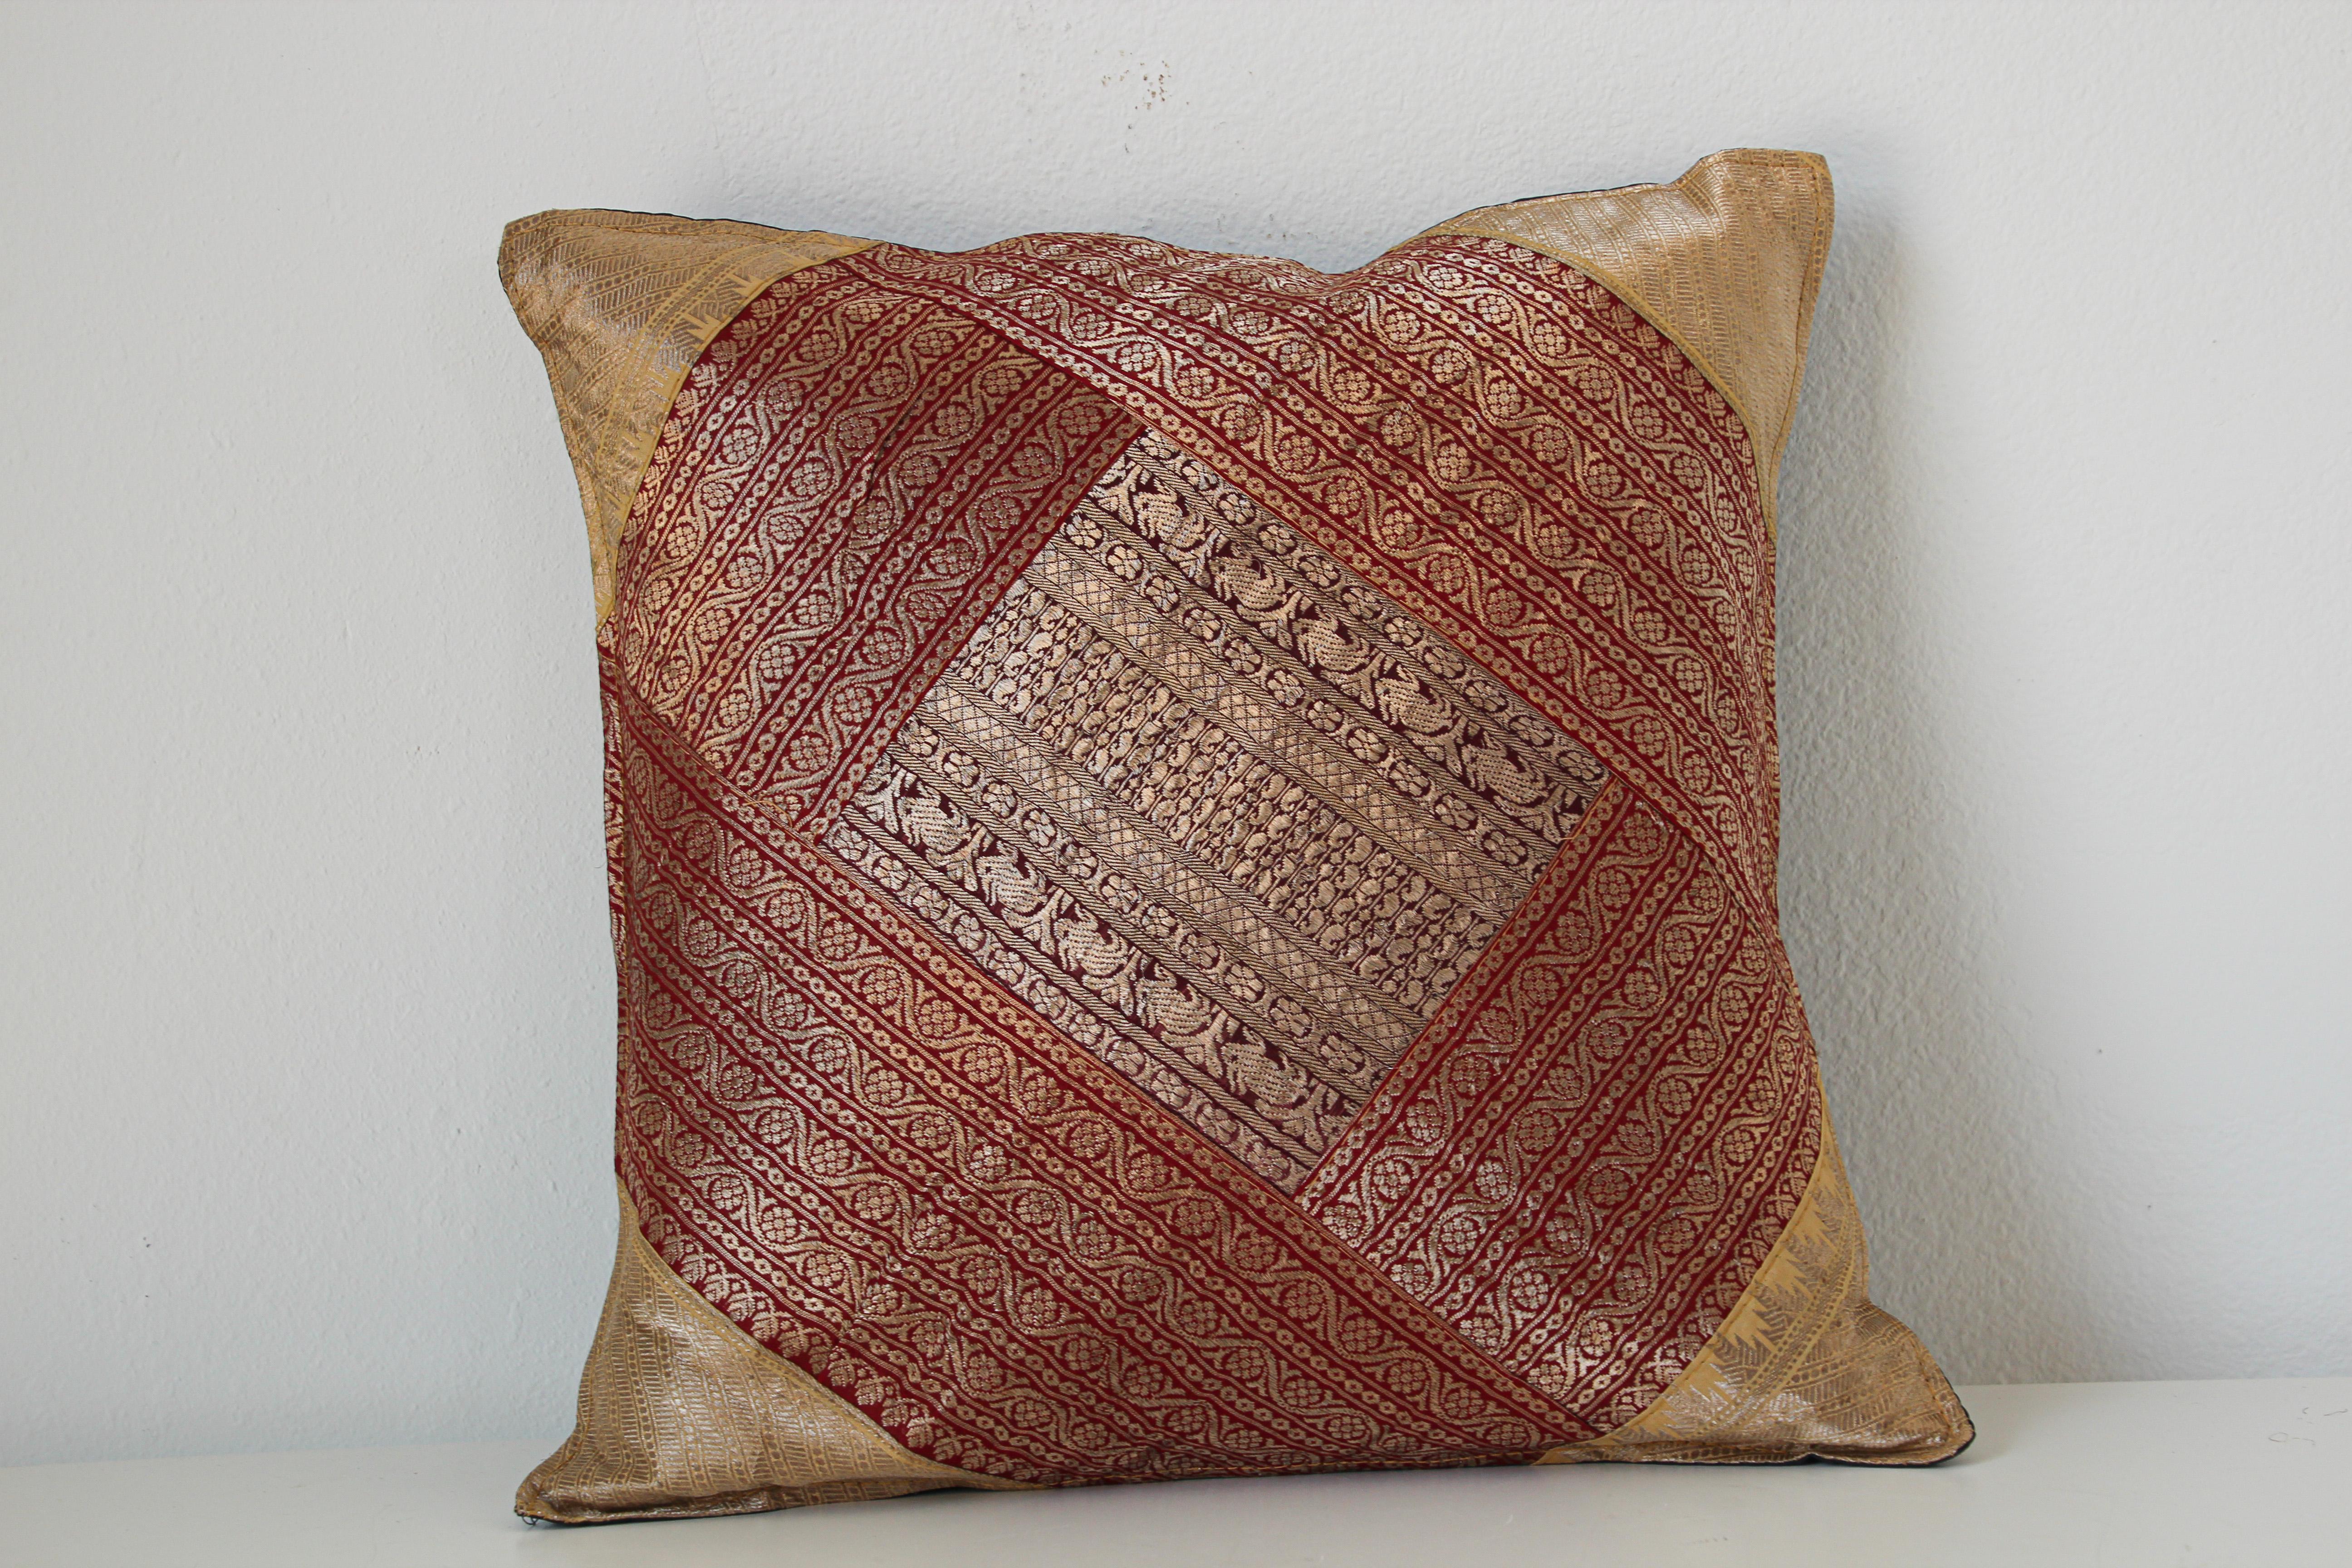 made in india throw pillows